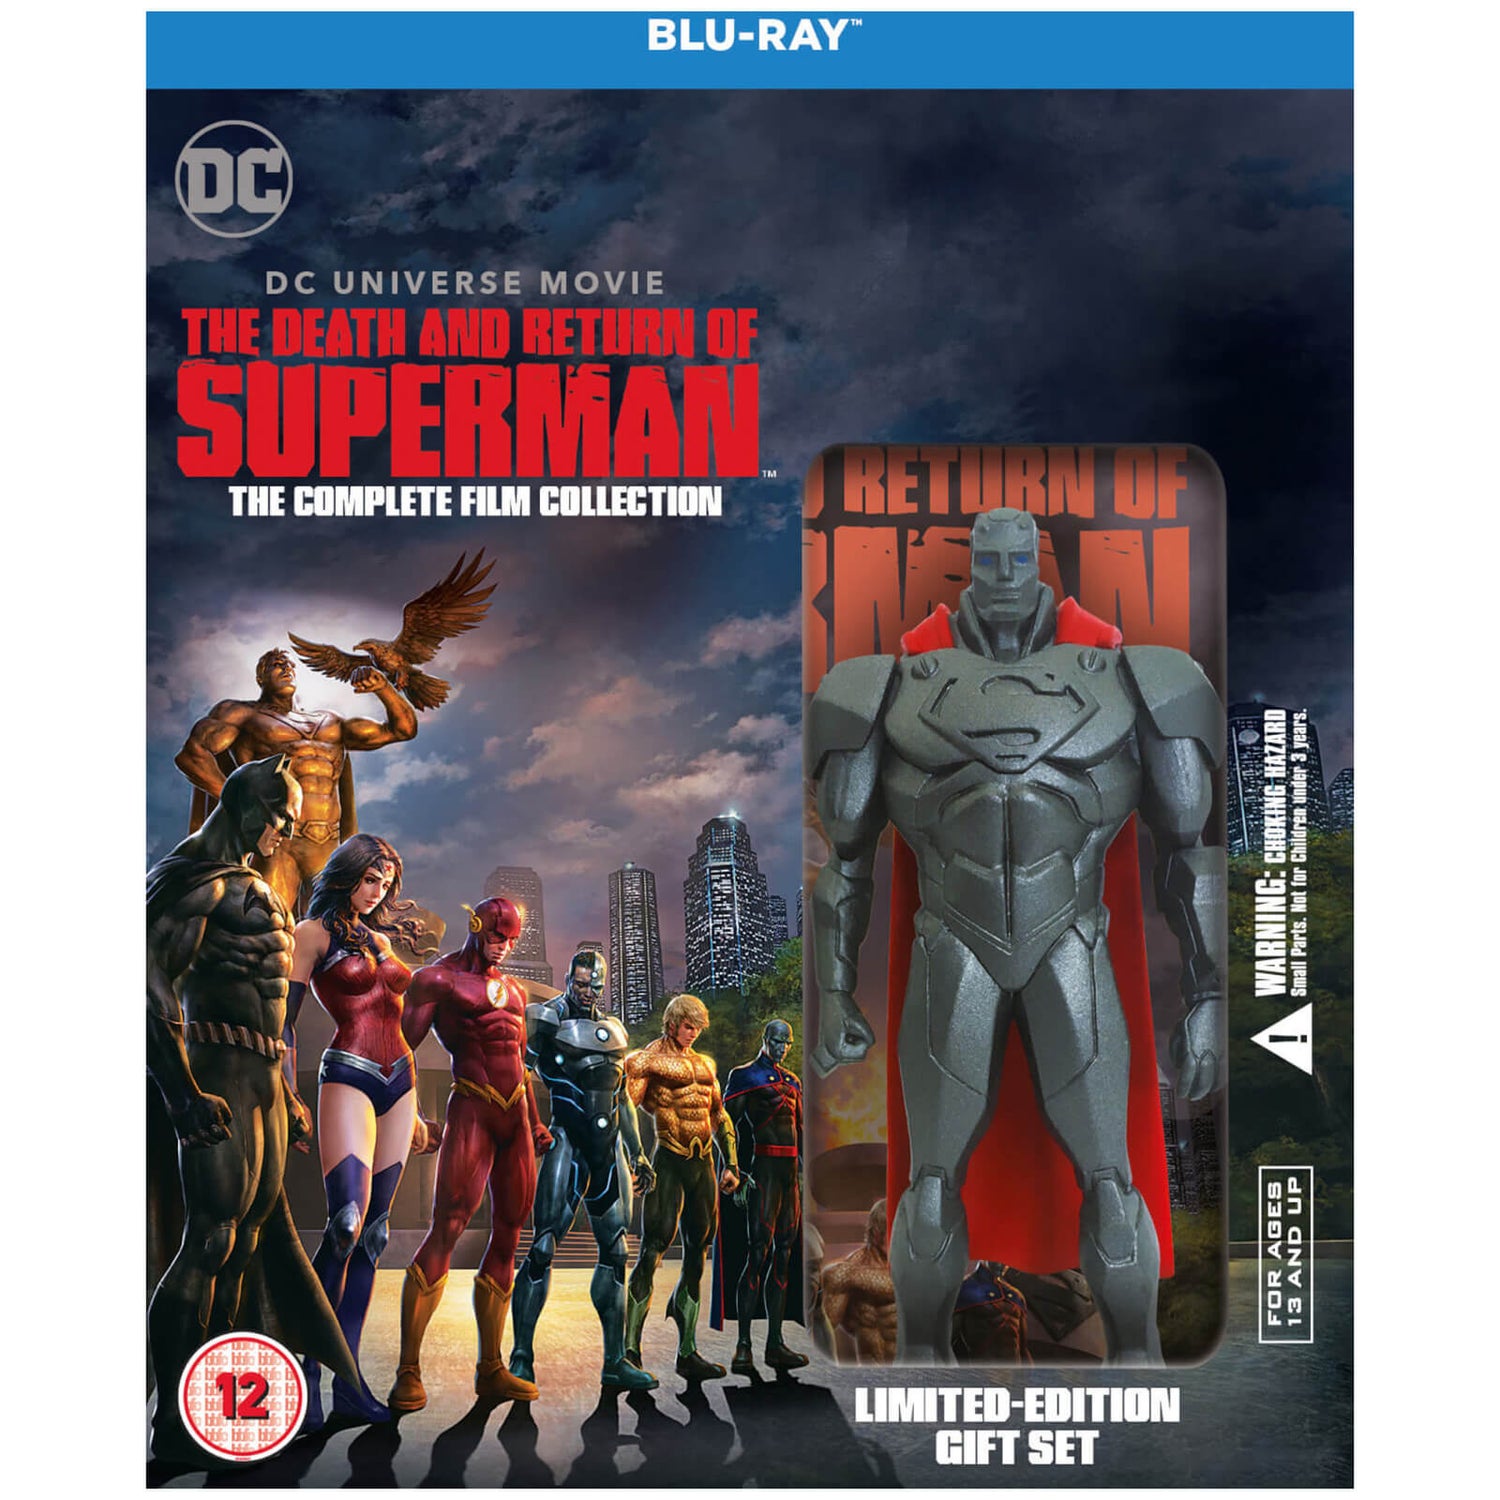 The Death and Return of Superman Limited Edition Figurine Gift Set